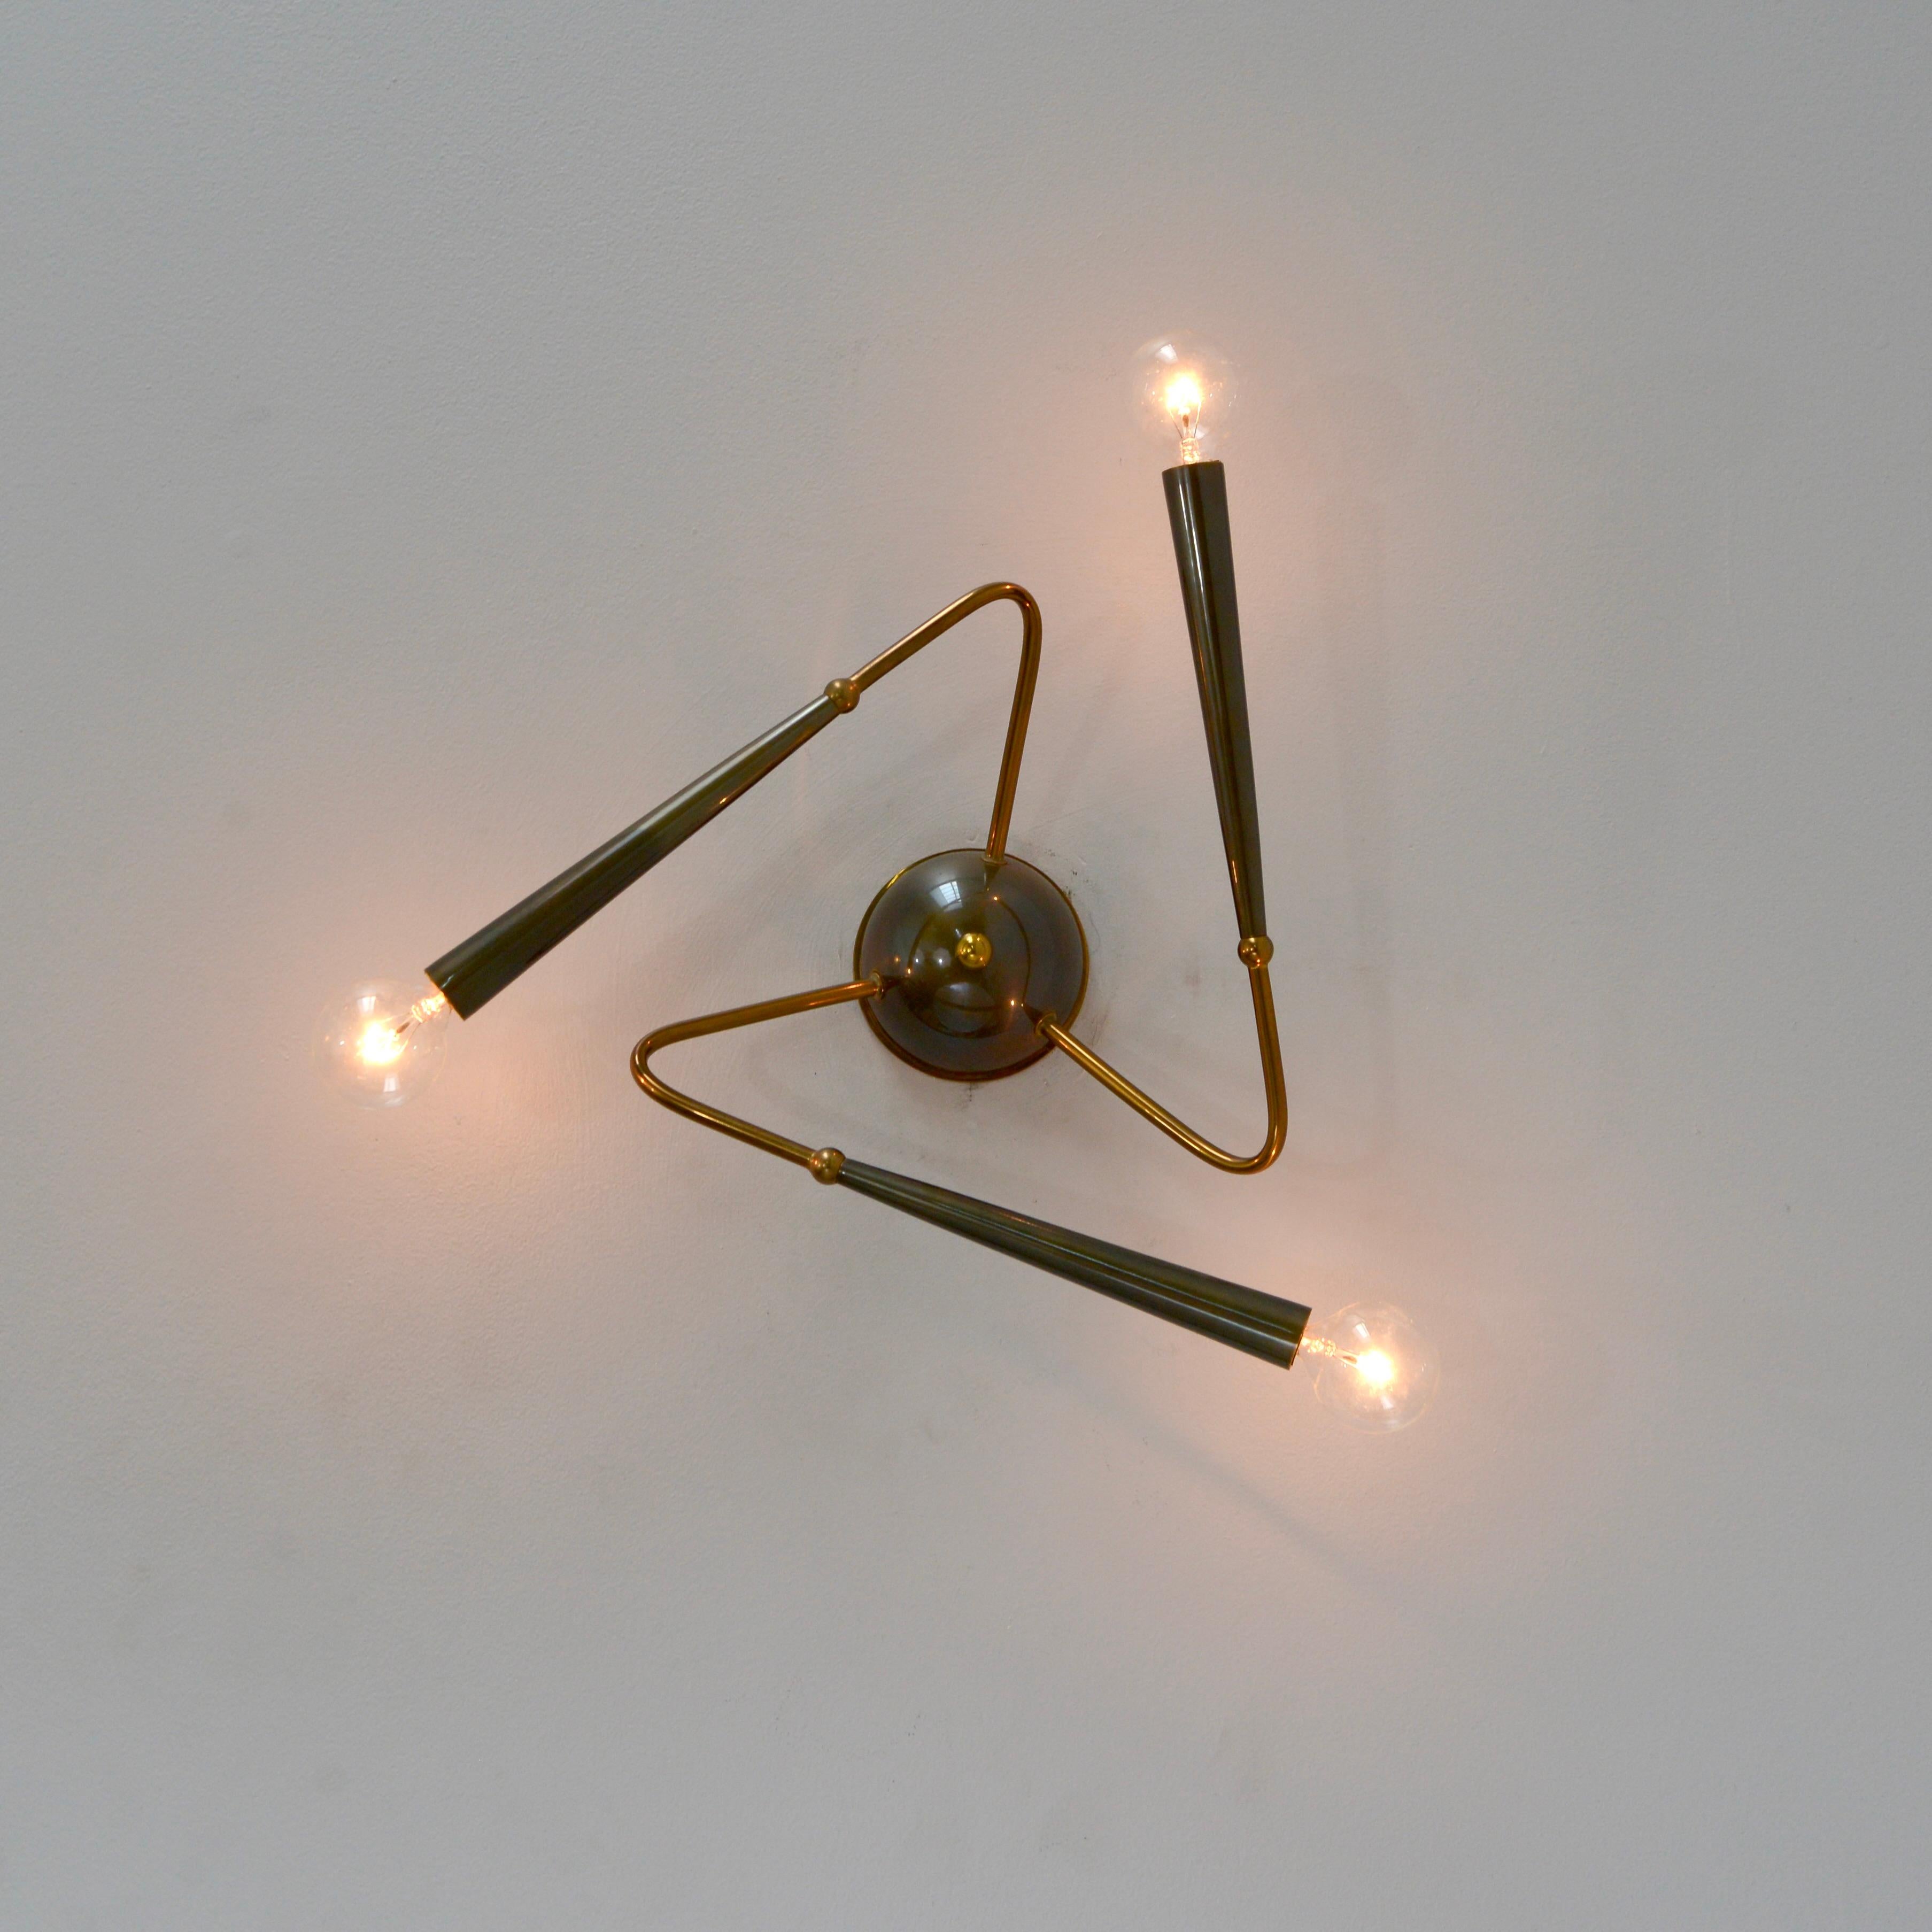 Wonderful  1950s brass Stilnovo Sputnik flush mount or wall fixture from Italy. Partially restored and rewired with 3 E12 candelabra based sockets, for use in the US. Original brass finish. Light bulbs and all mounting hardware included with order.